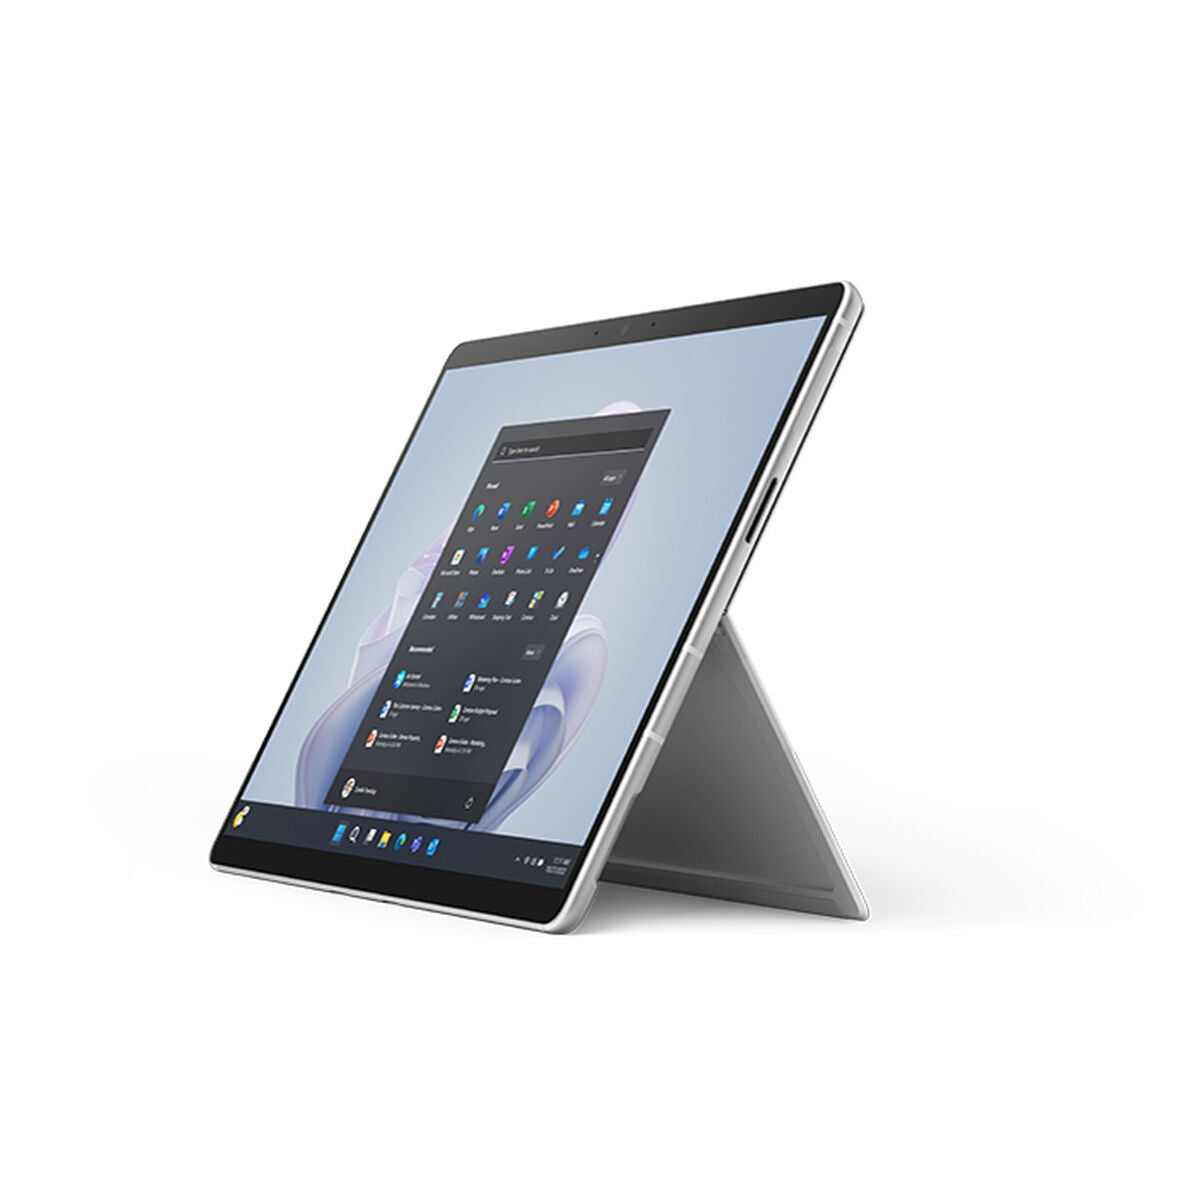 Tablet Microsoft Surface Pro 9 32 GB RAM 13" Intel Core i7-1265U Platinum, Microsoft, Computing, tablet-microsoft-surface-pro-9-32-gb-ram-13-intel-core-i7-1265u-platinum, :32 GB, :64 GB, Brand_Microsoft, category-reference-2609, category-reference-2617, category-reference-2626, category-reference-t-19685, Condition_NEW, Price_+ 1000, telephones & tablets, Teleworking, RiotNook